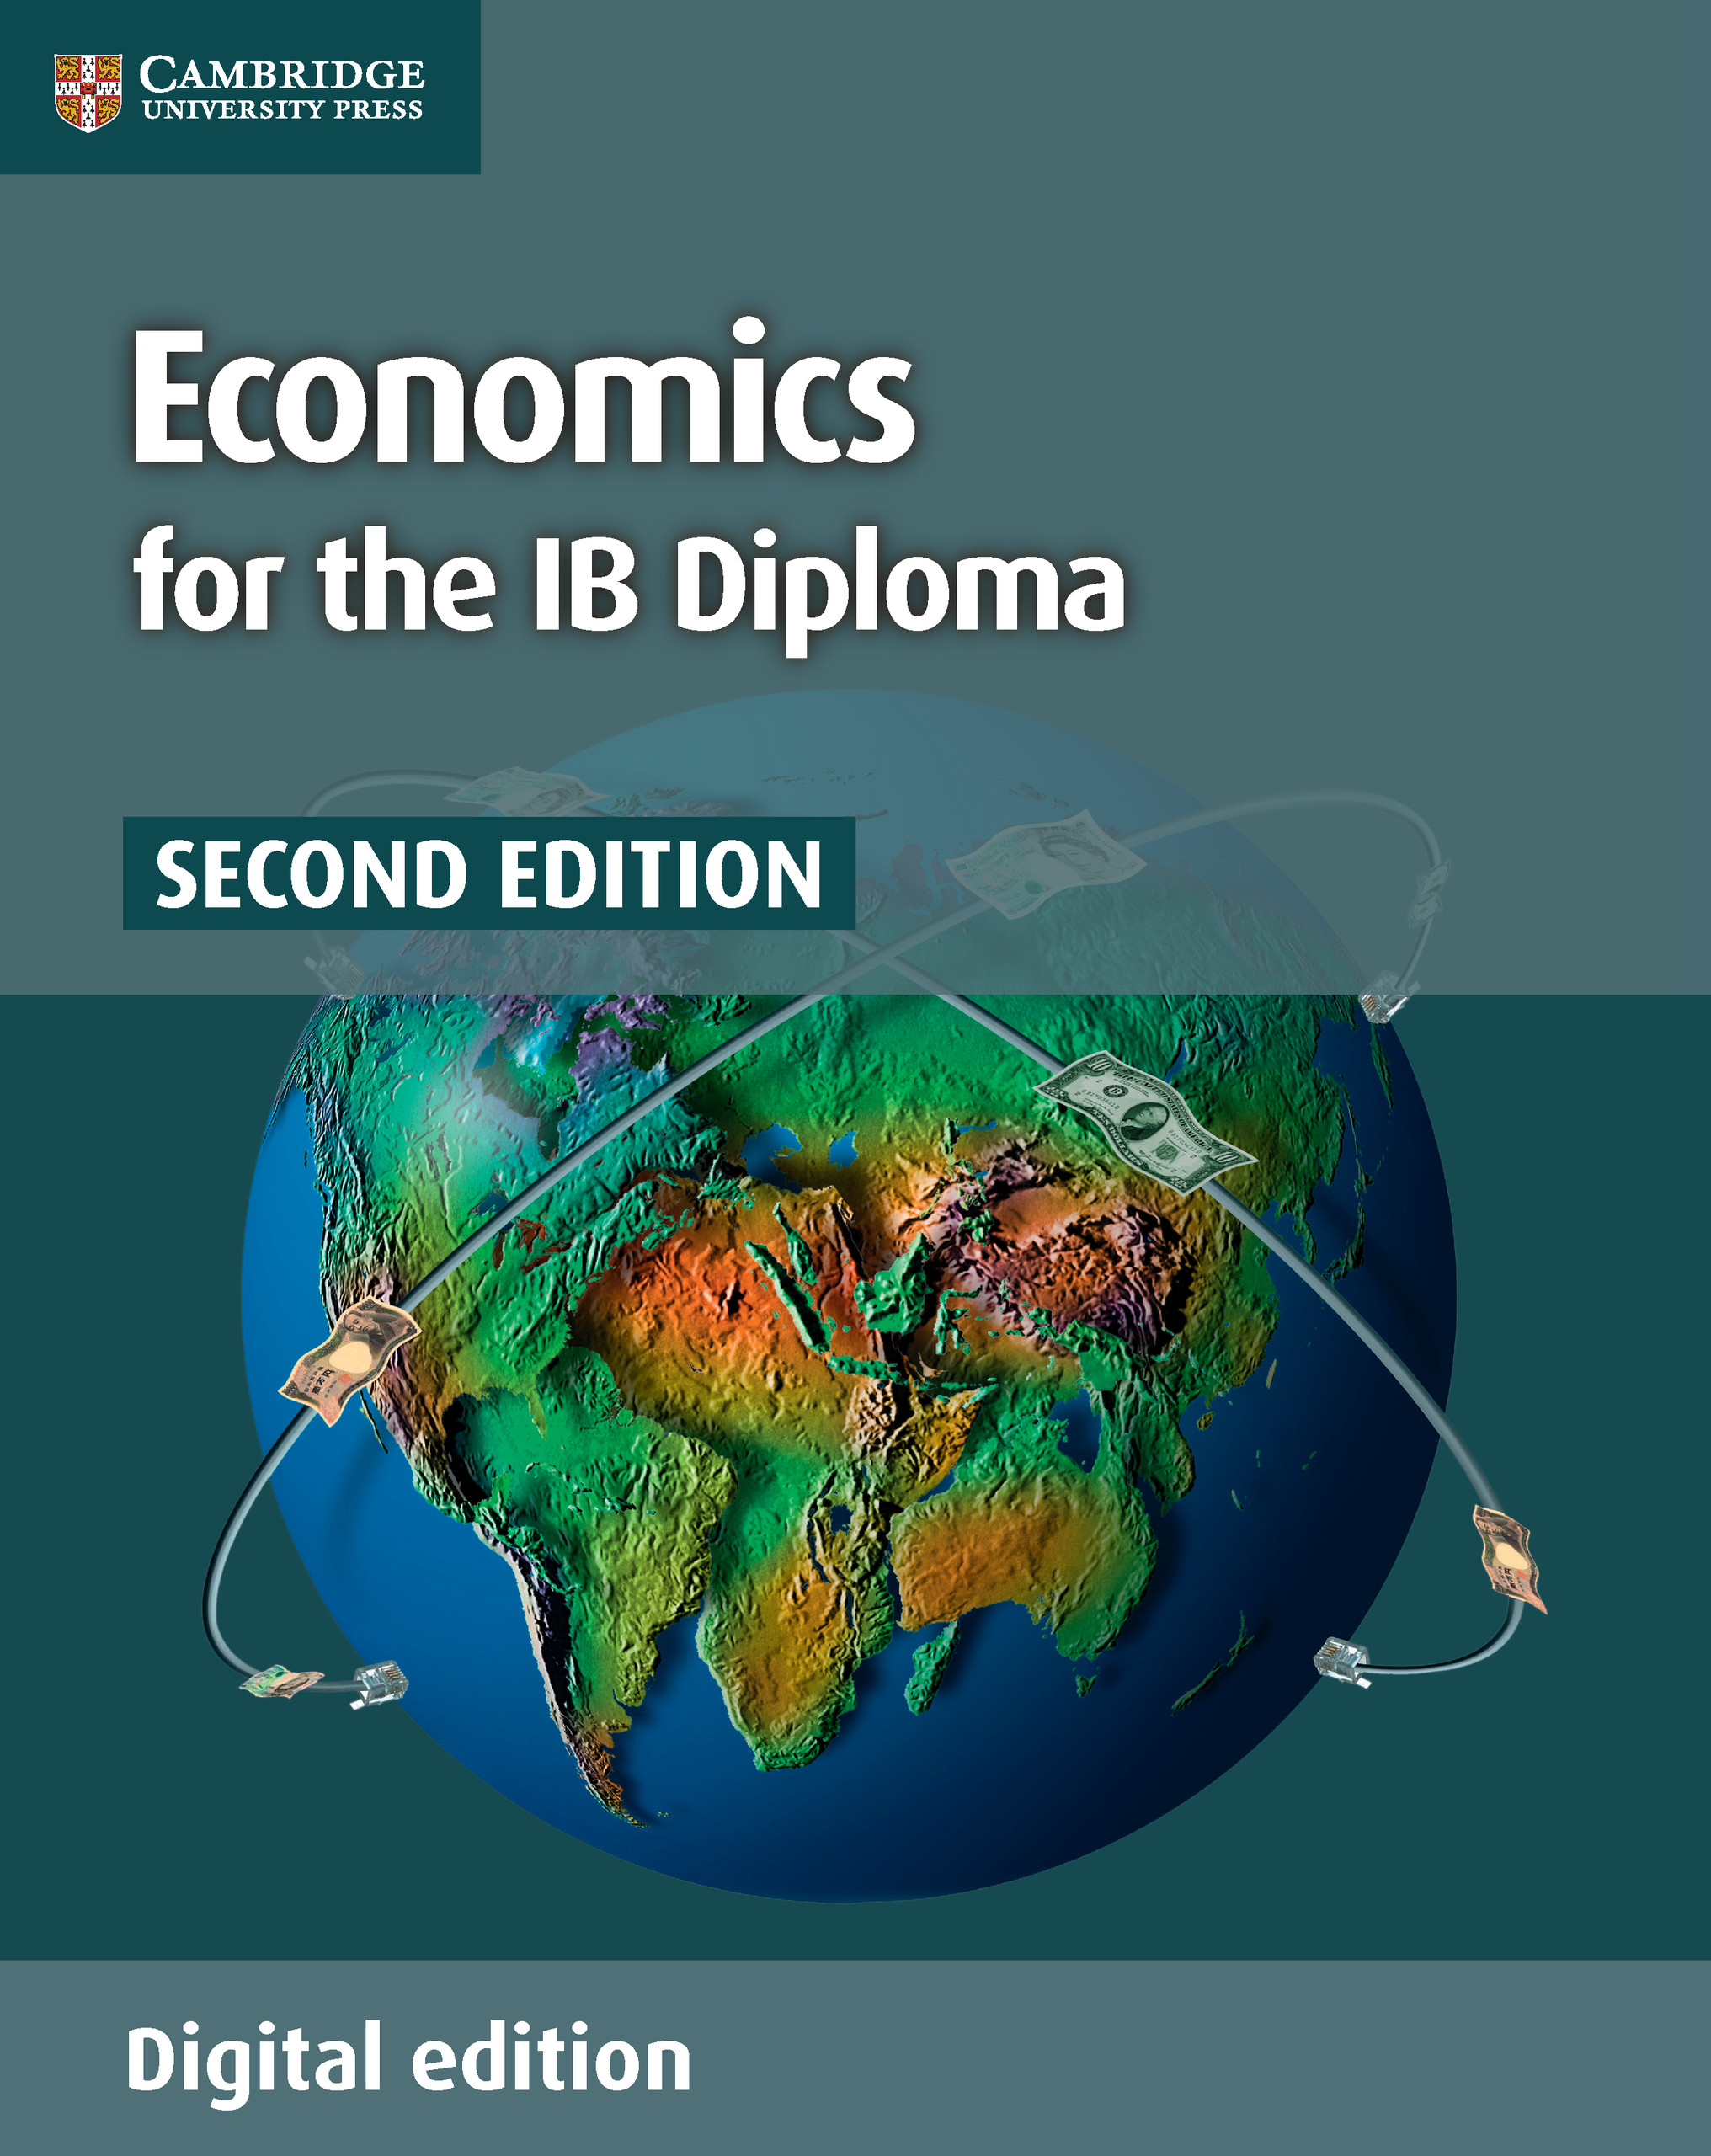 Economics for the IB Diploma 2nd Edition